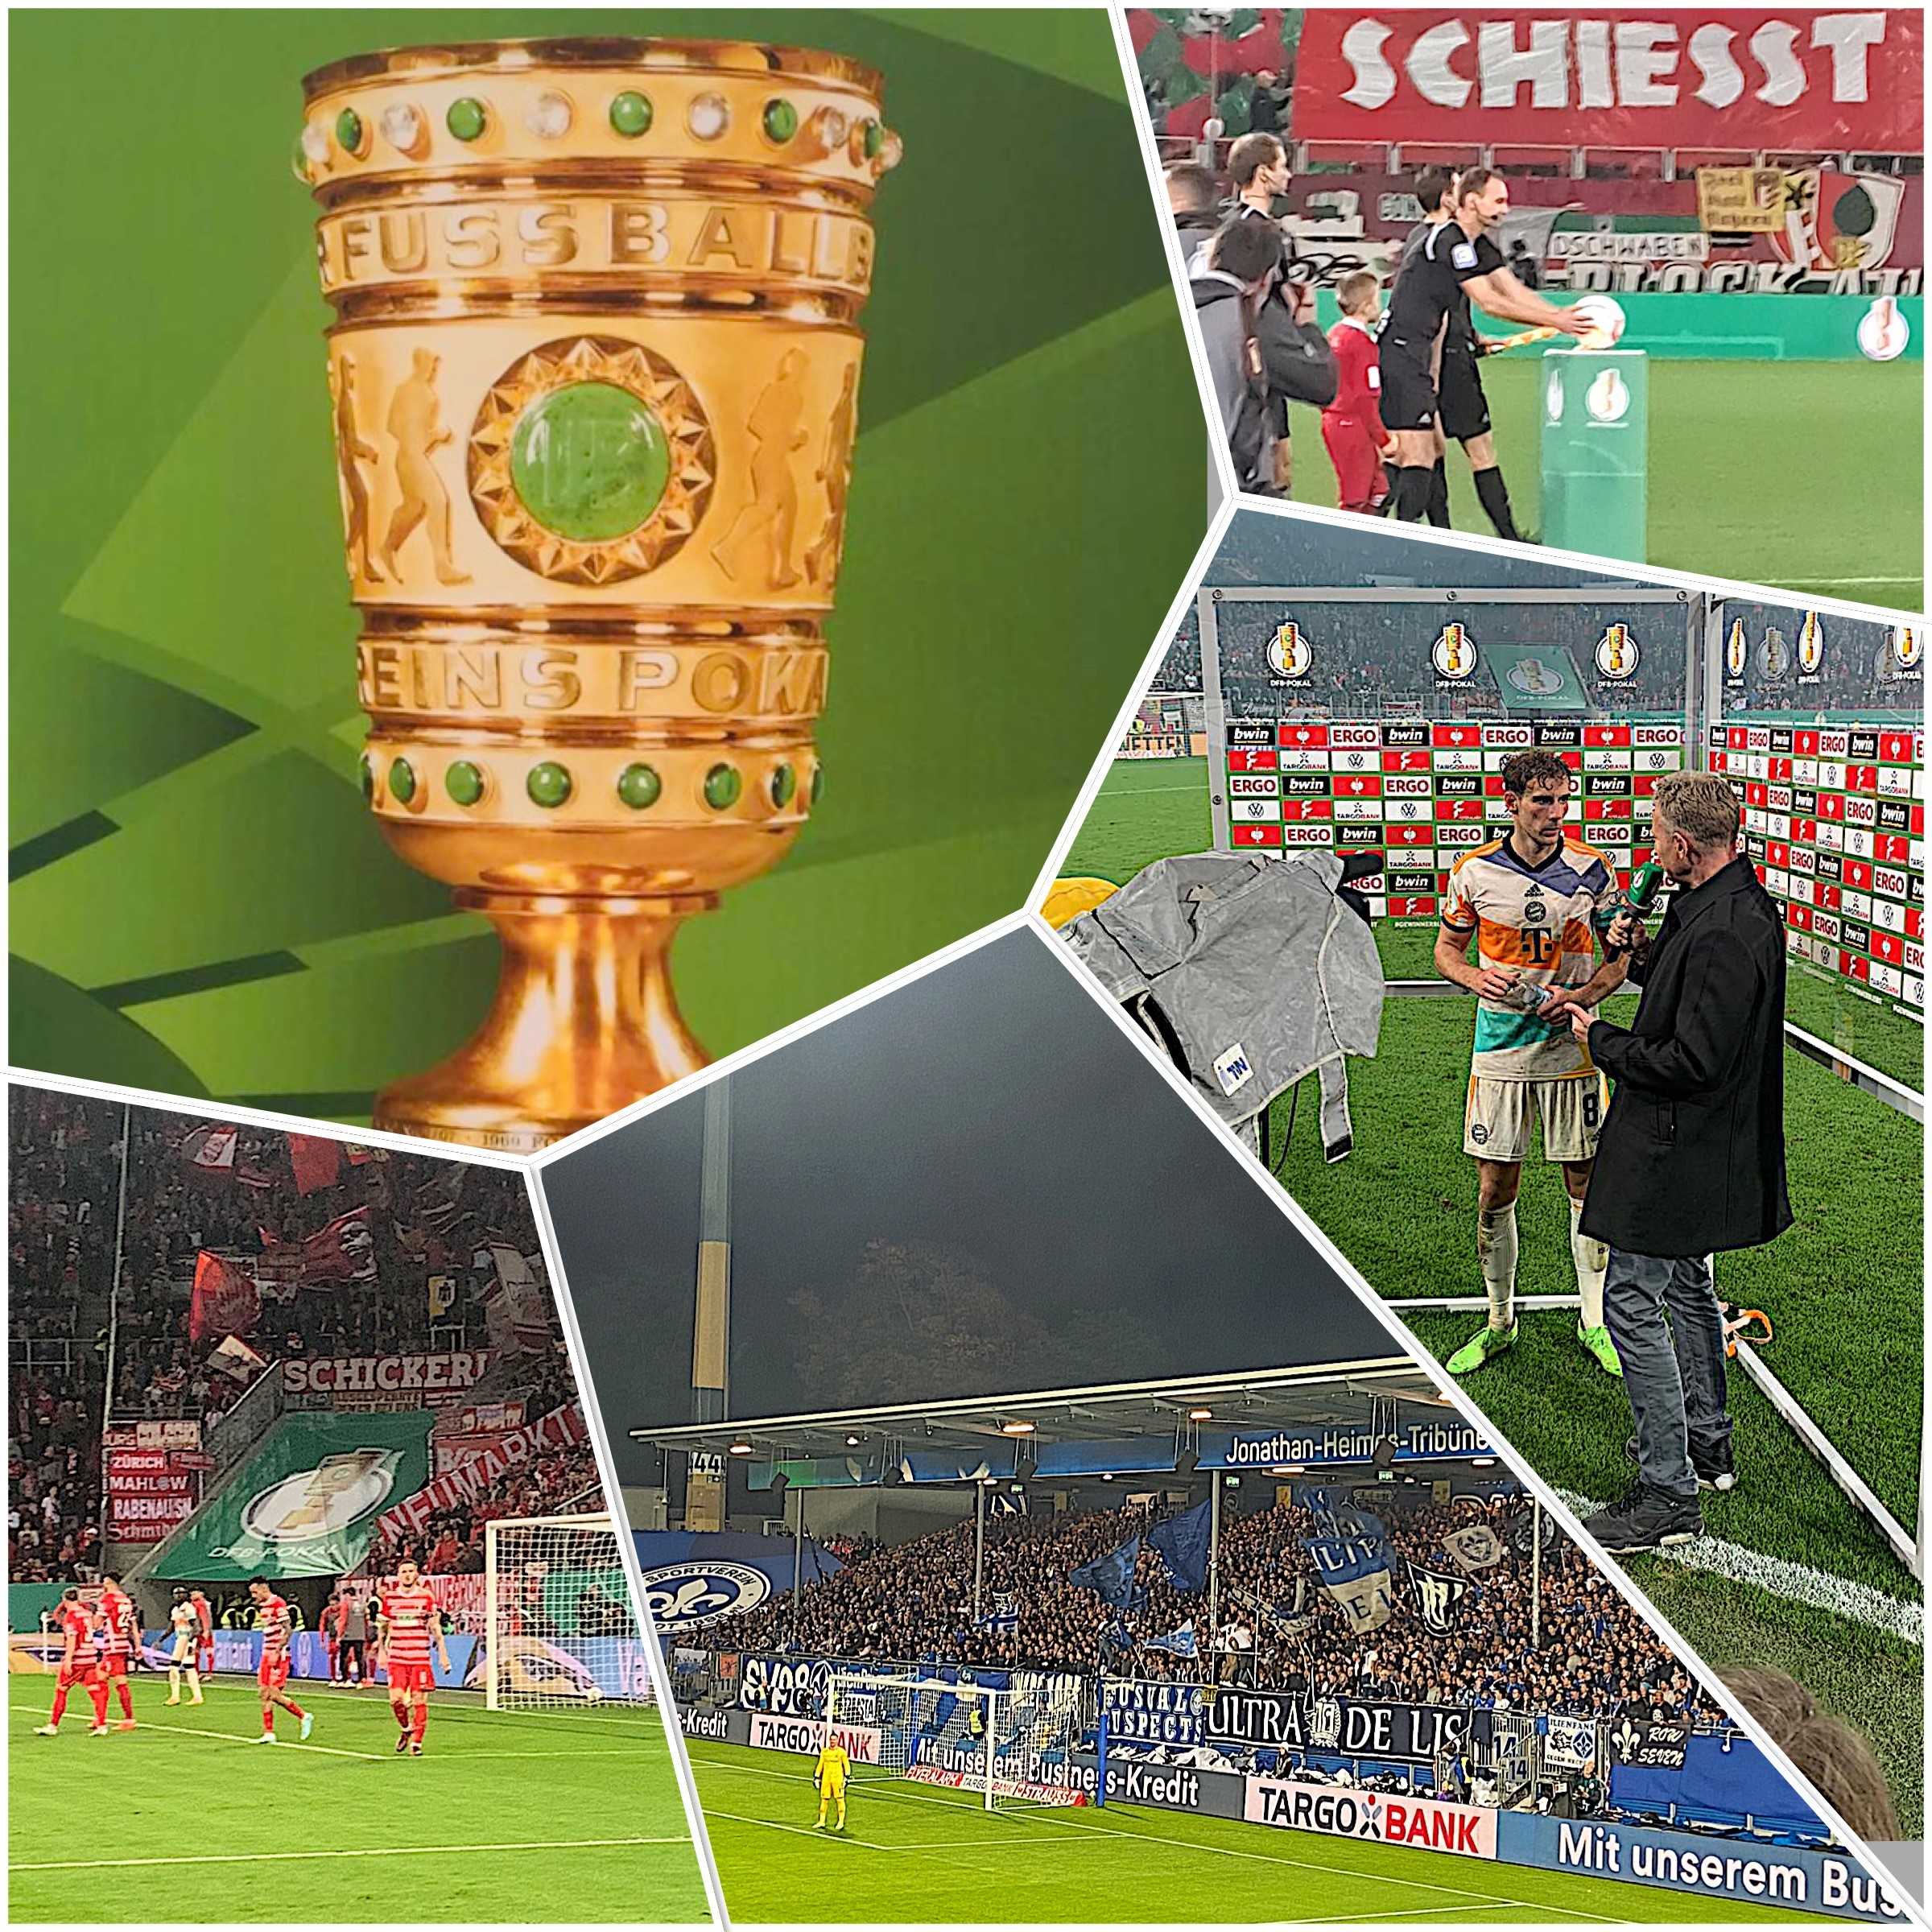 DFB Cup as always with surprises 🏆